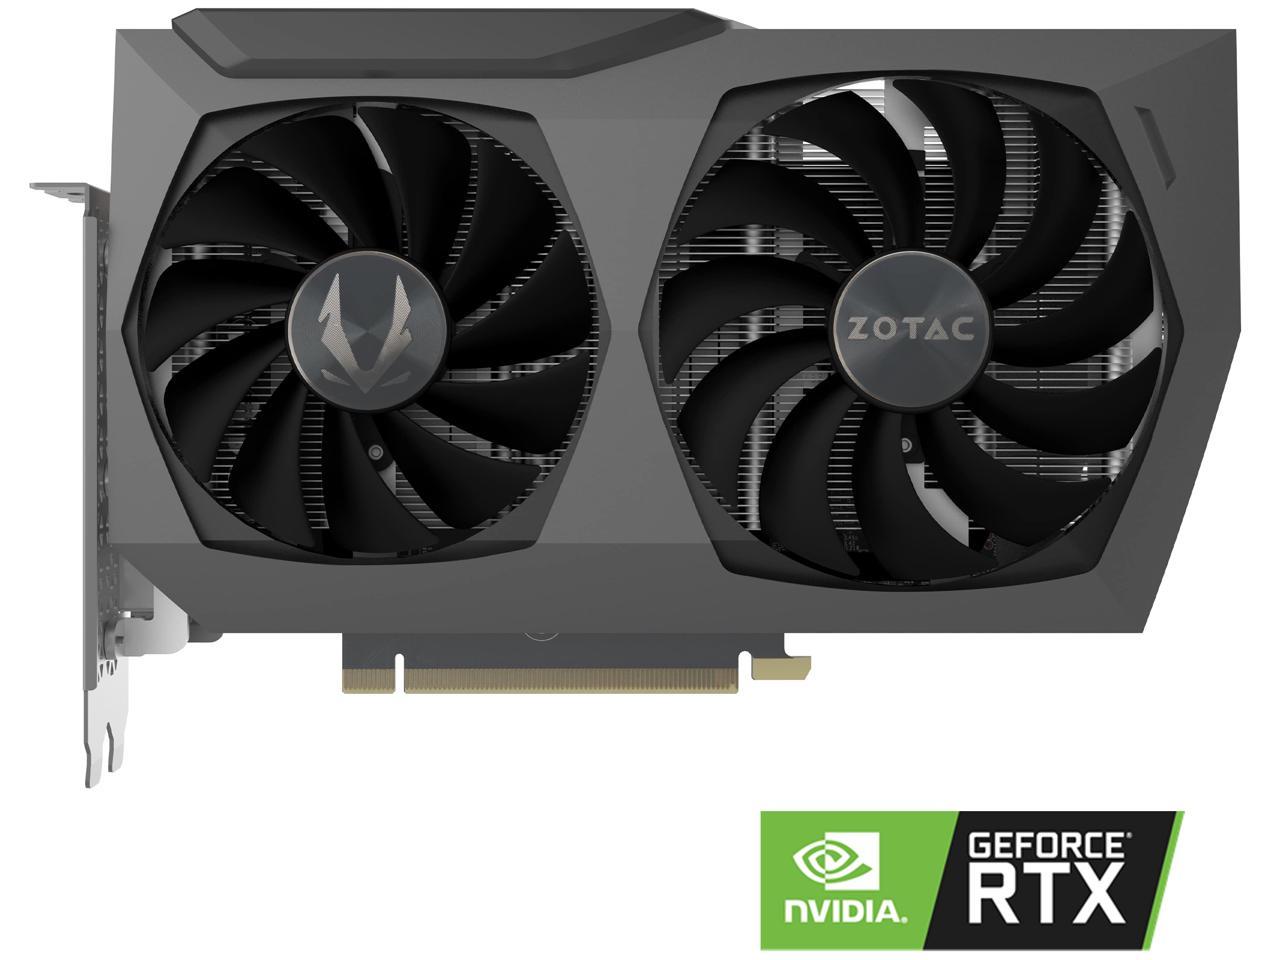 ZOTAC GAMING GeForce RTX 3070 Twin Edge OC 8GB GDDR6 256-bit 14 Gbps PCIE  4.0 Gaming Graphics Card, IceStorm 2.0 Advanced Cooling, White LED Logo 